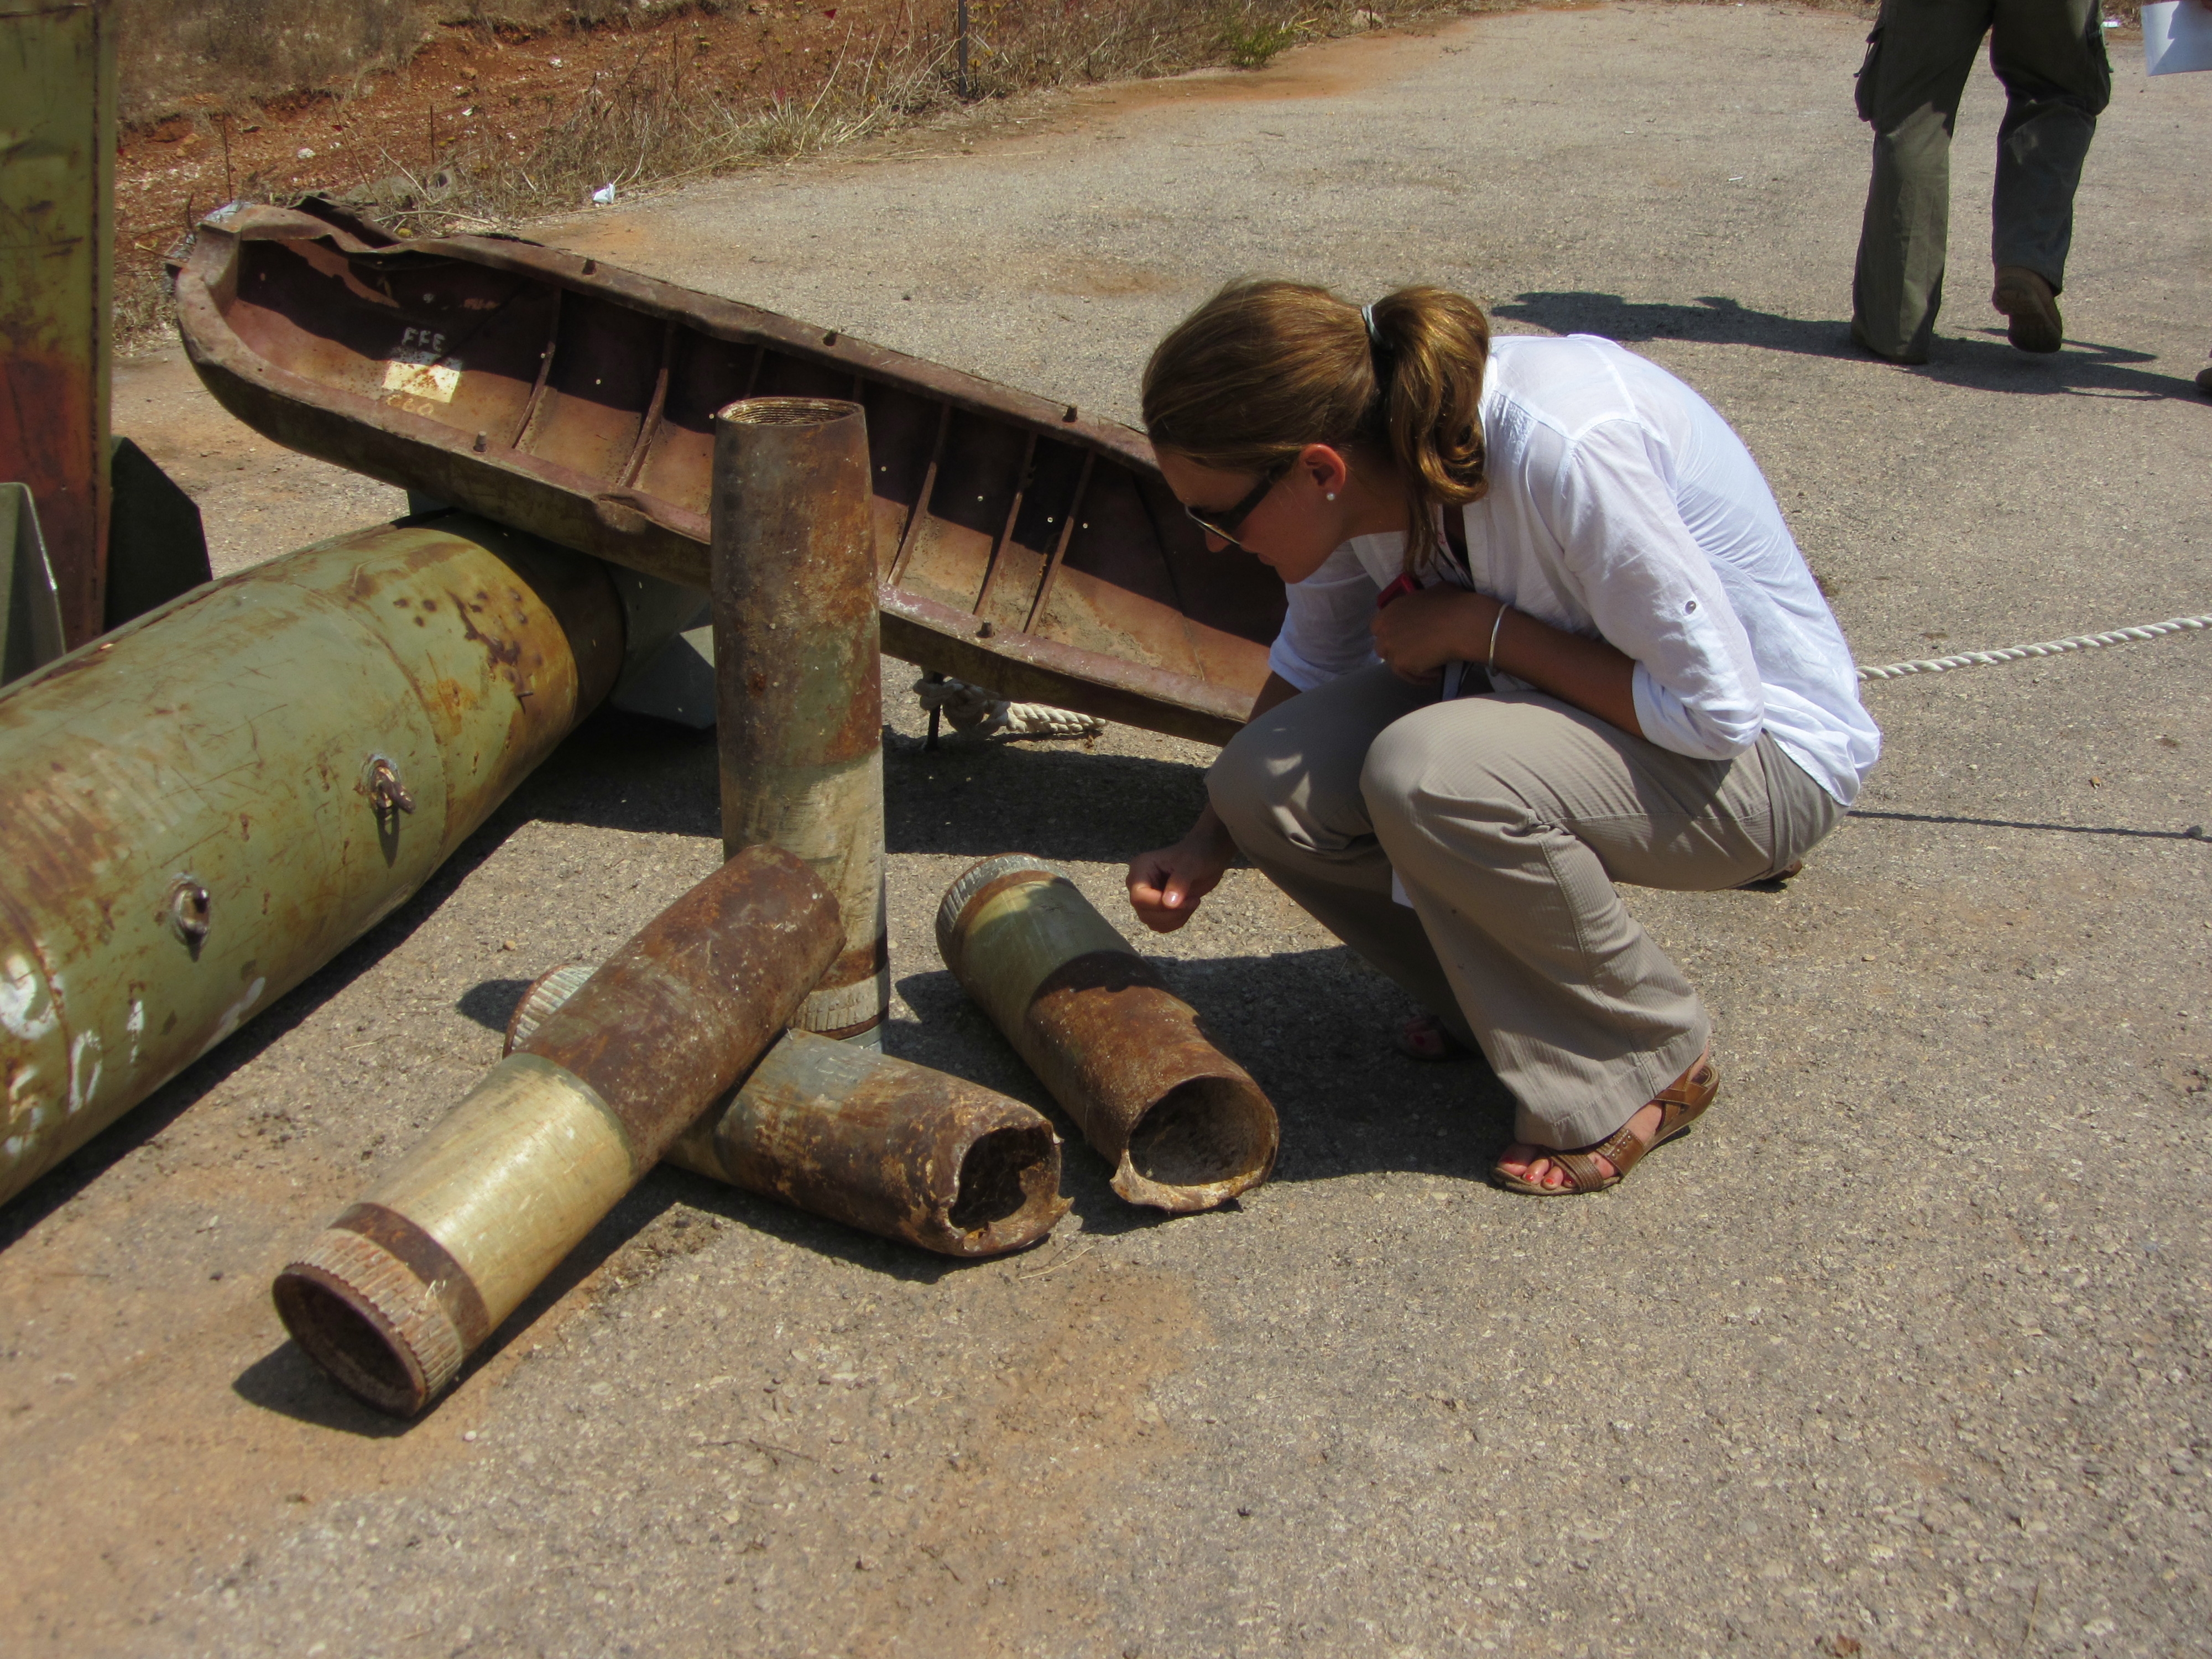 A woman crouches to examine rusty metal pieces that look like weapons.